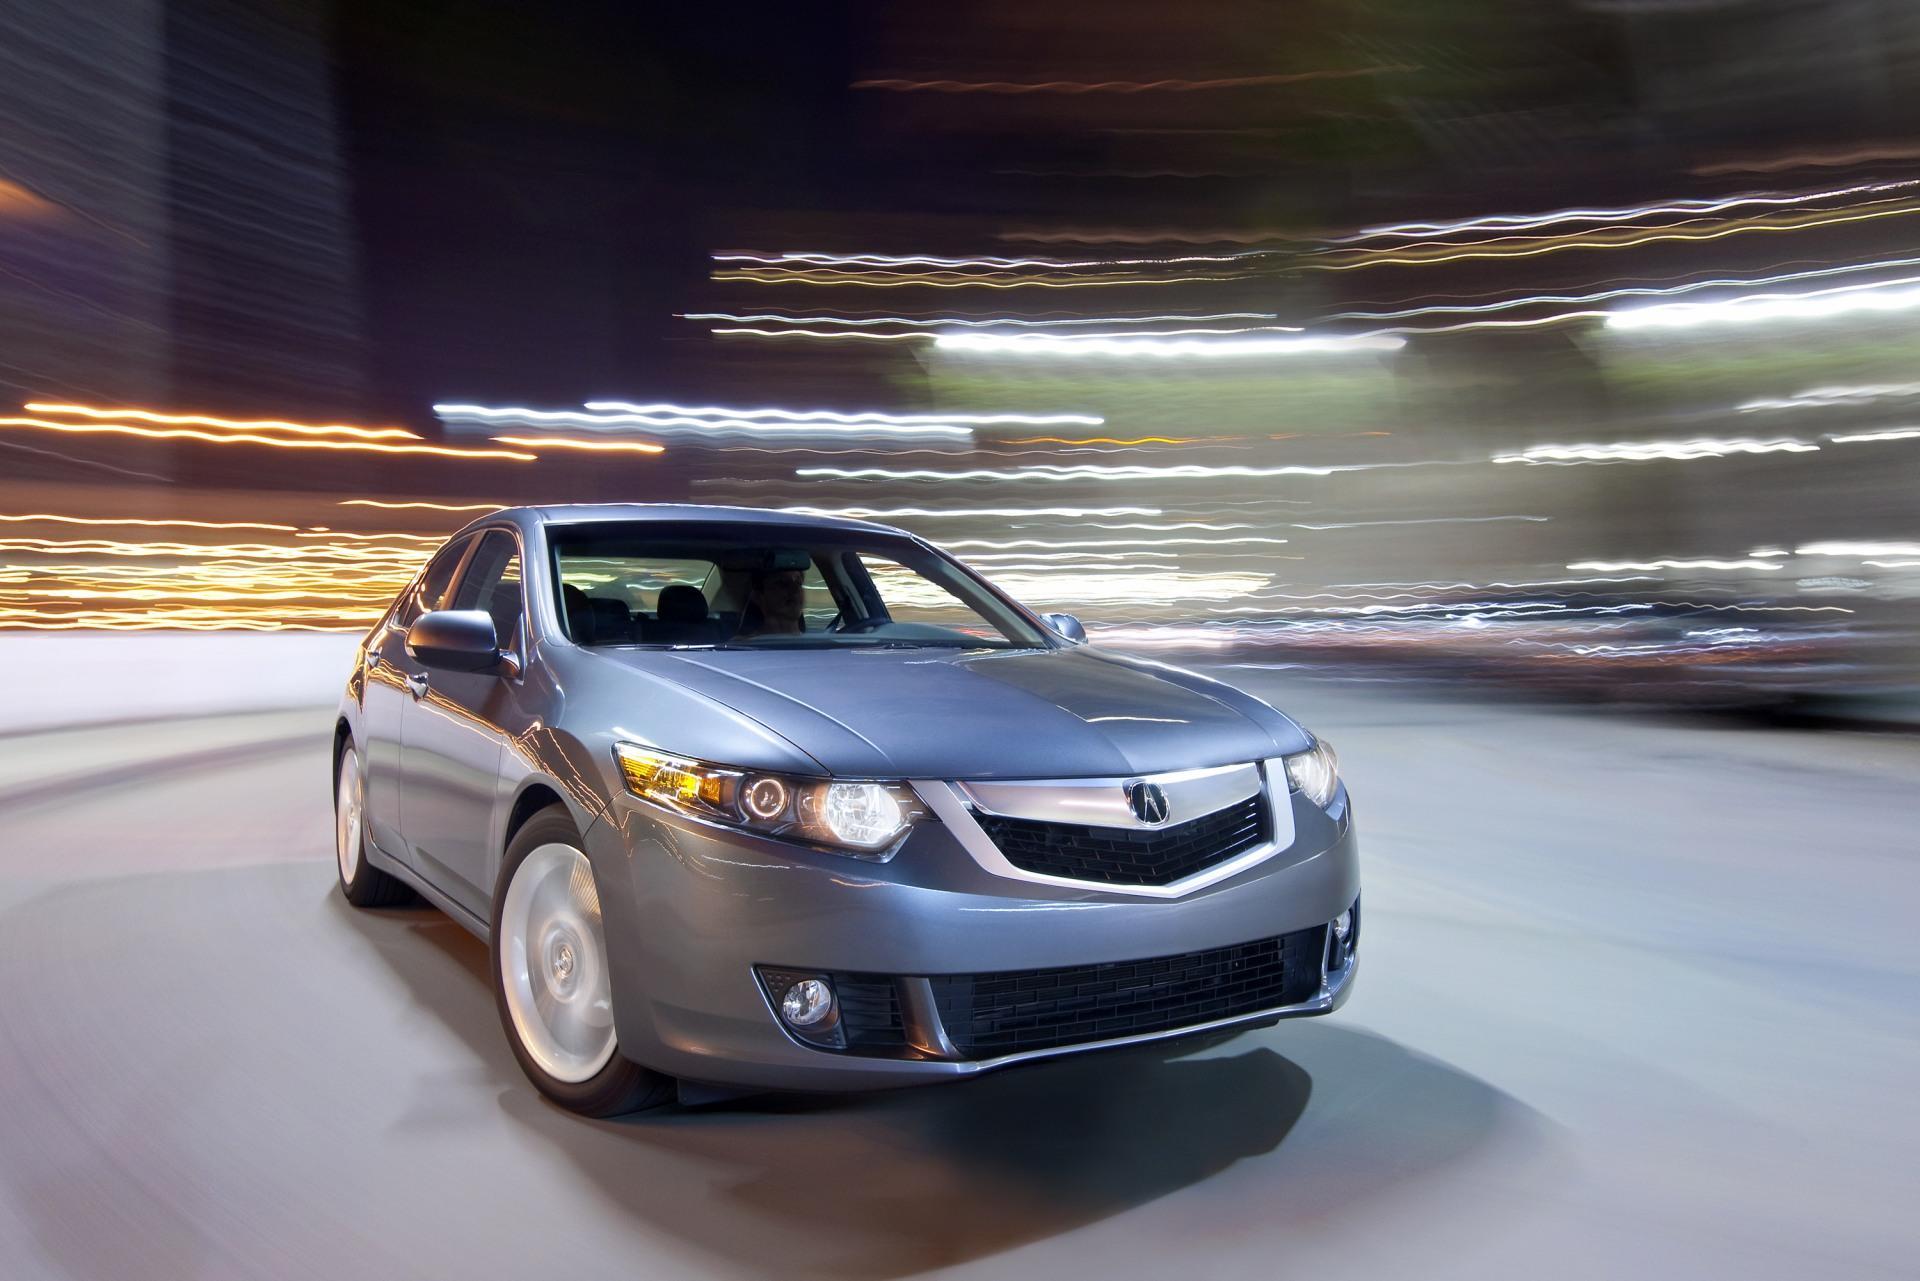 Acura TSX V 6 Wallpaper And Image Gallery